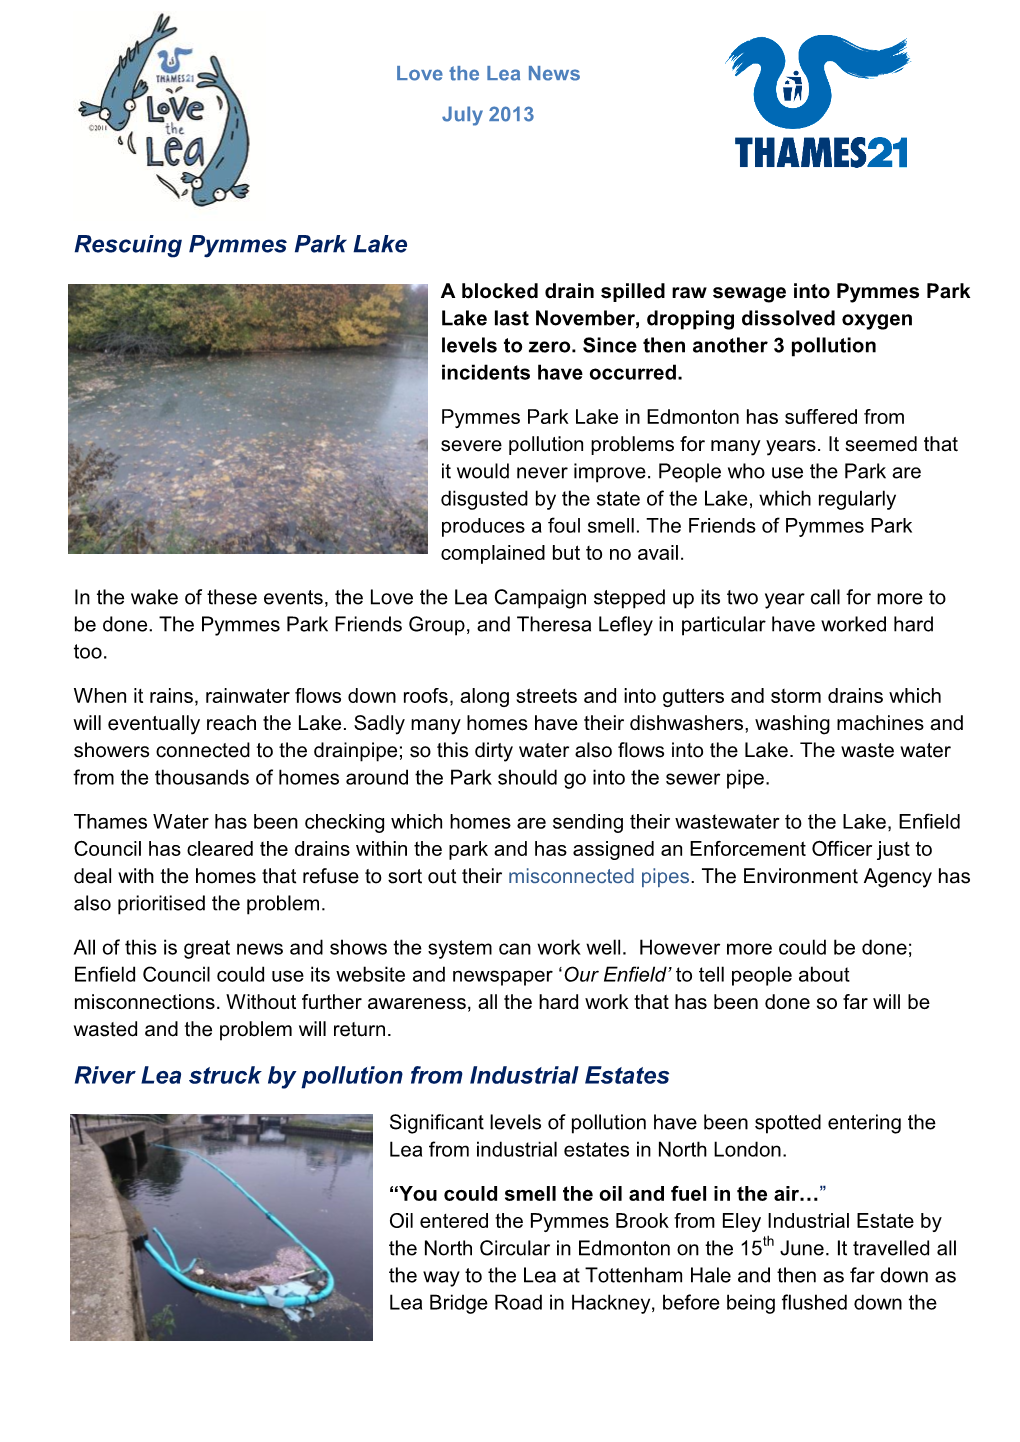 Rescuing Pymmes Park Lake River Lea Struck by Pollution from Industrial Estates